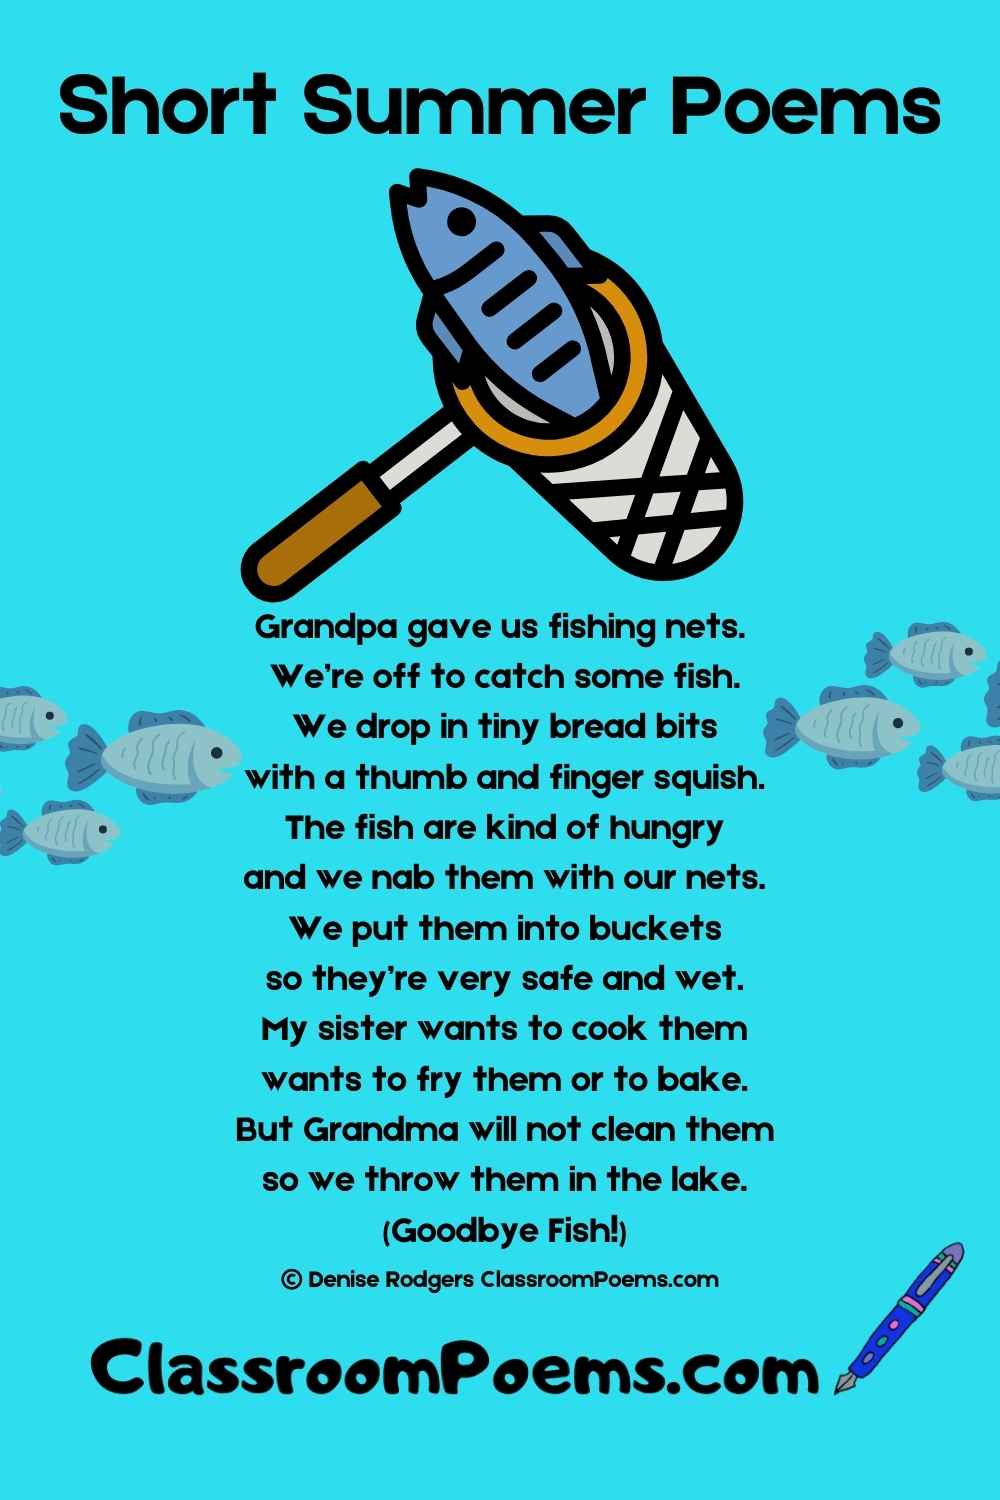 Summer poem about fishing by Denise Rodgers on ClassroomPoems.com.